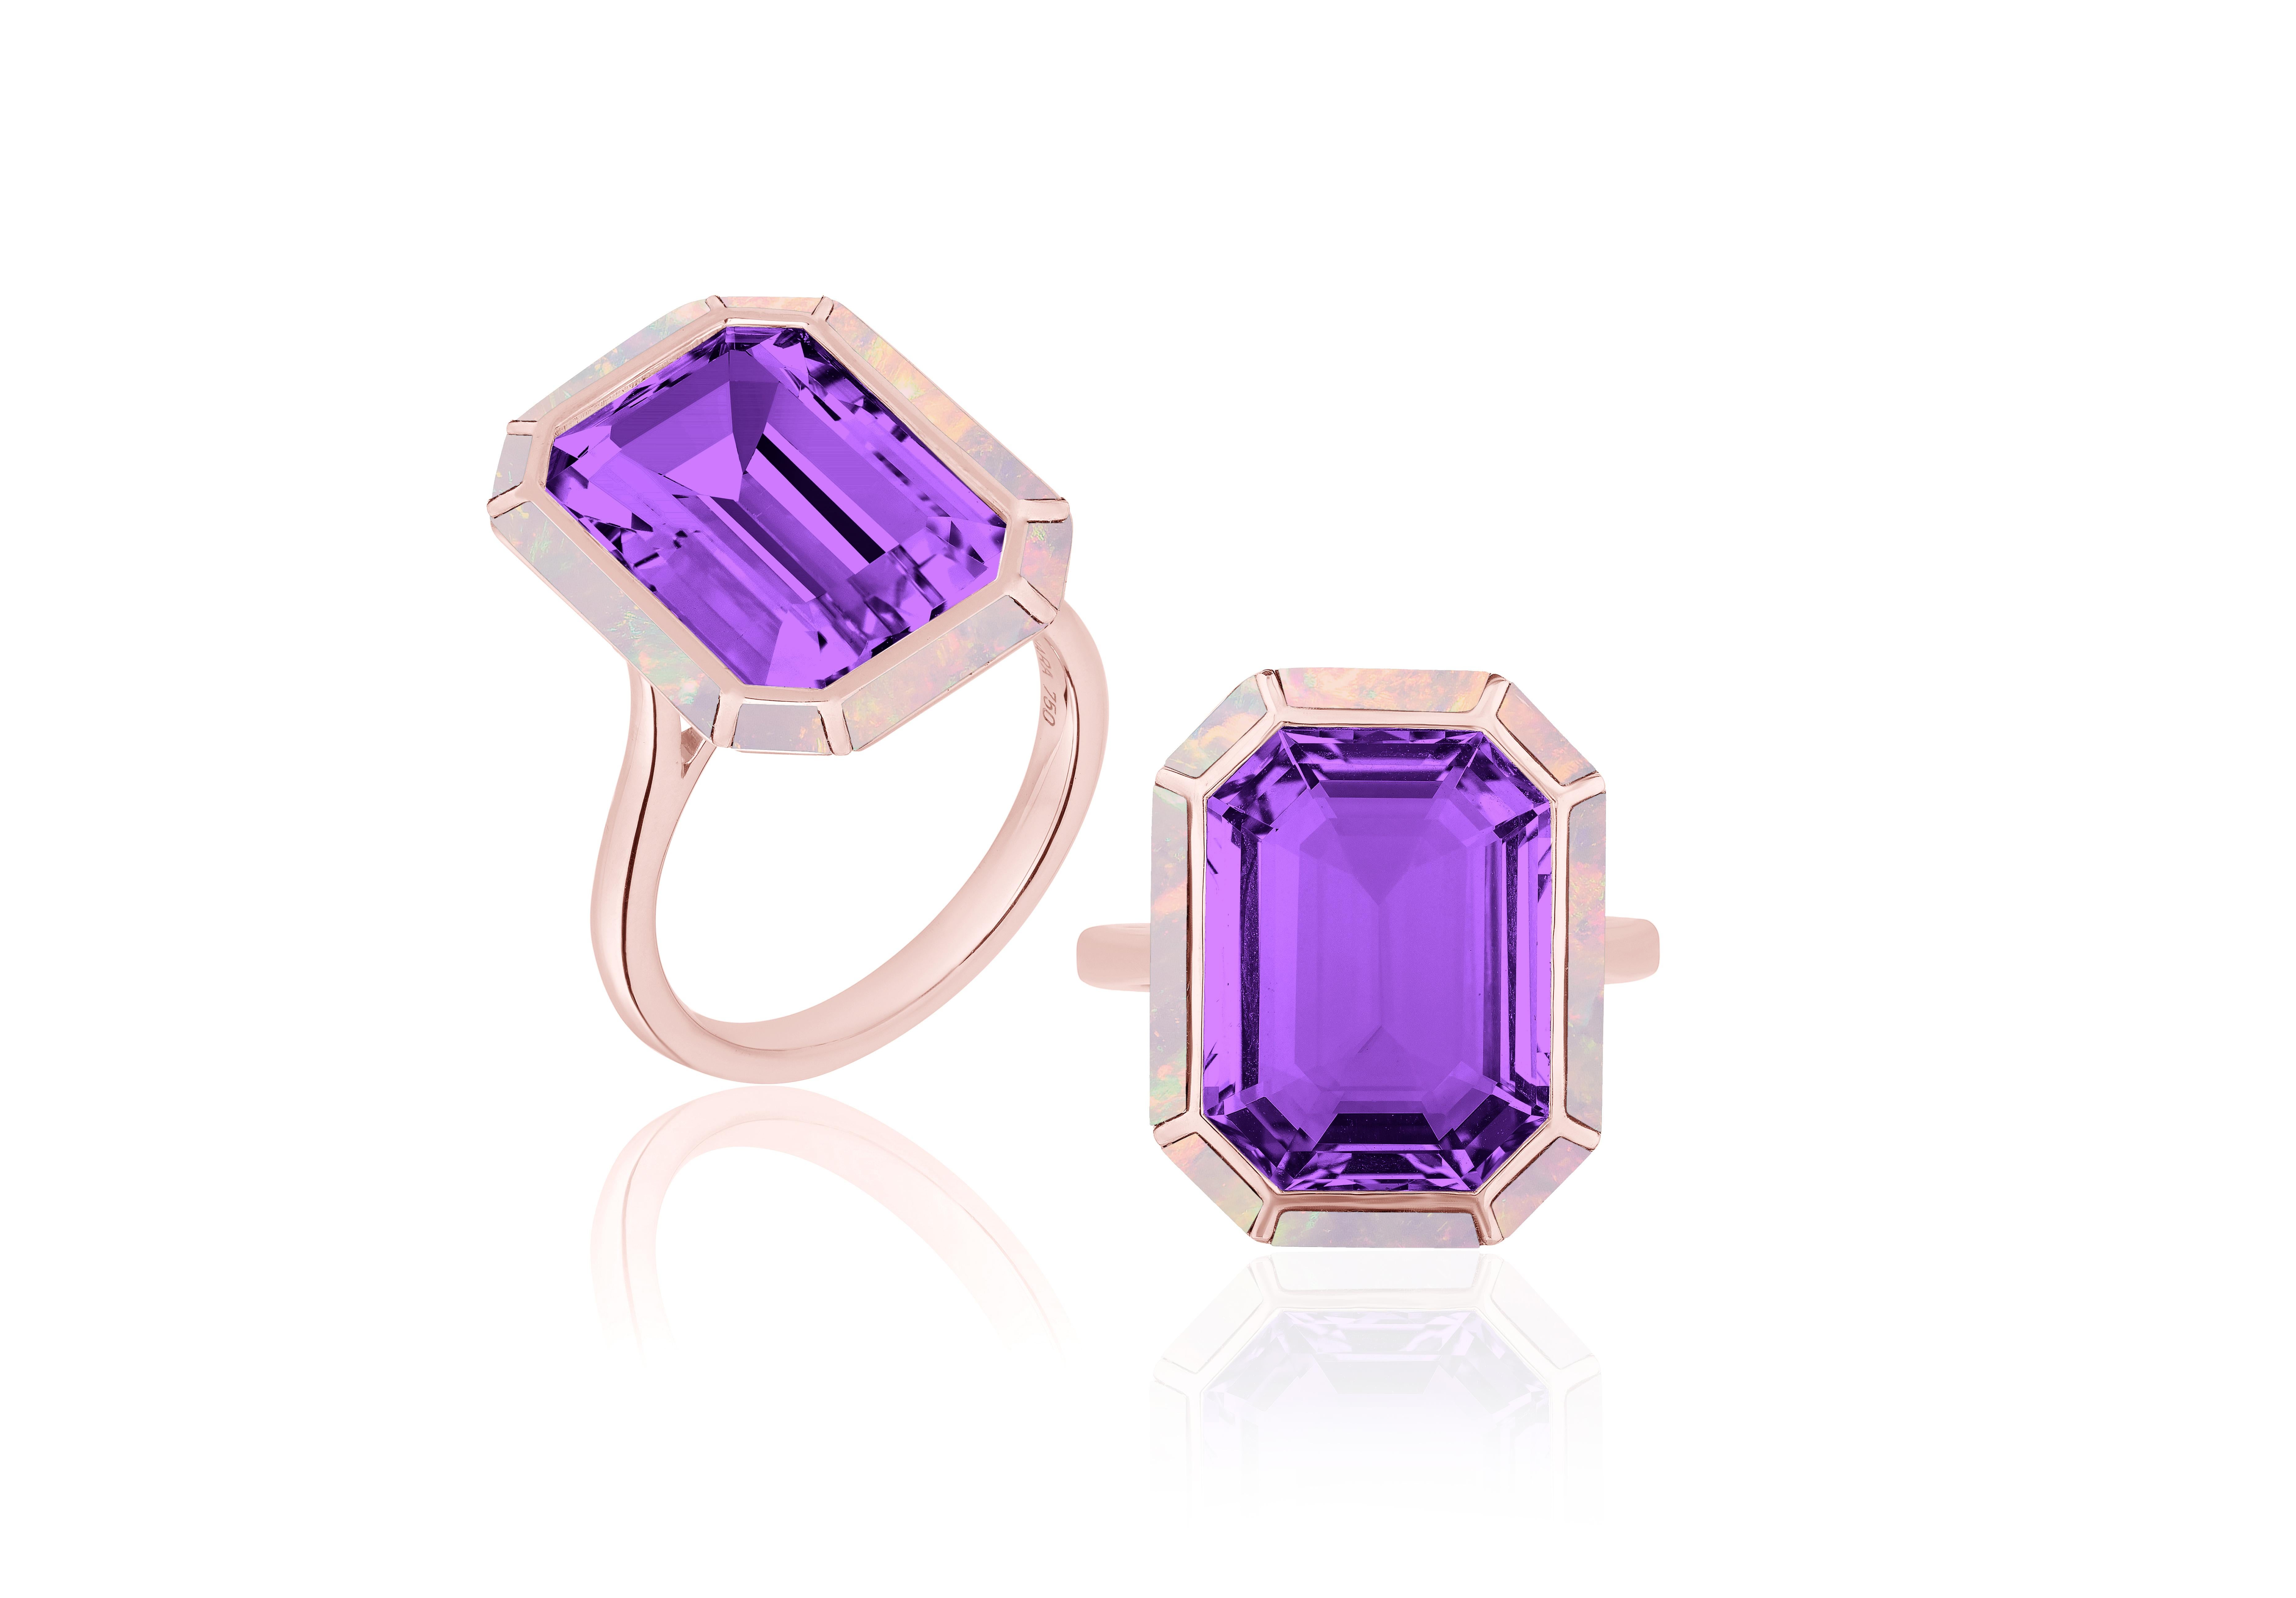 This Amethyst & Pink Opal Emerald Cut Ring is a stunning piece of jewelry from the 'Melange' Collection, crafted in 18K Rose Gold. The ring features a beautiful emerald-cut Amethyst stone with a Pink Opal stone border. The combination of the rich